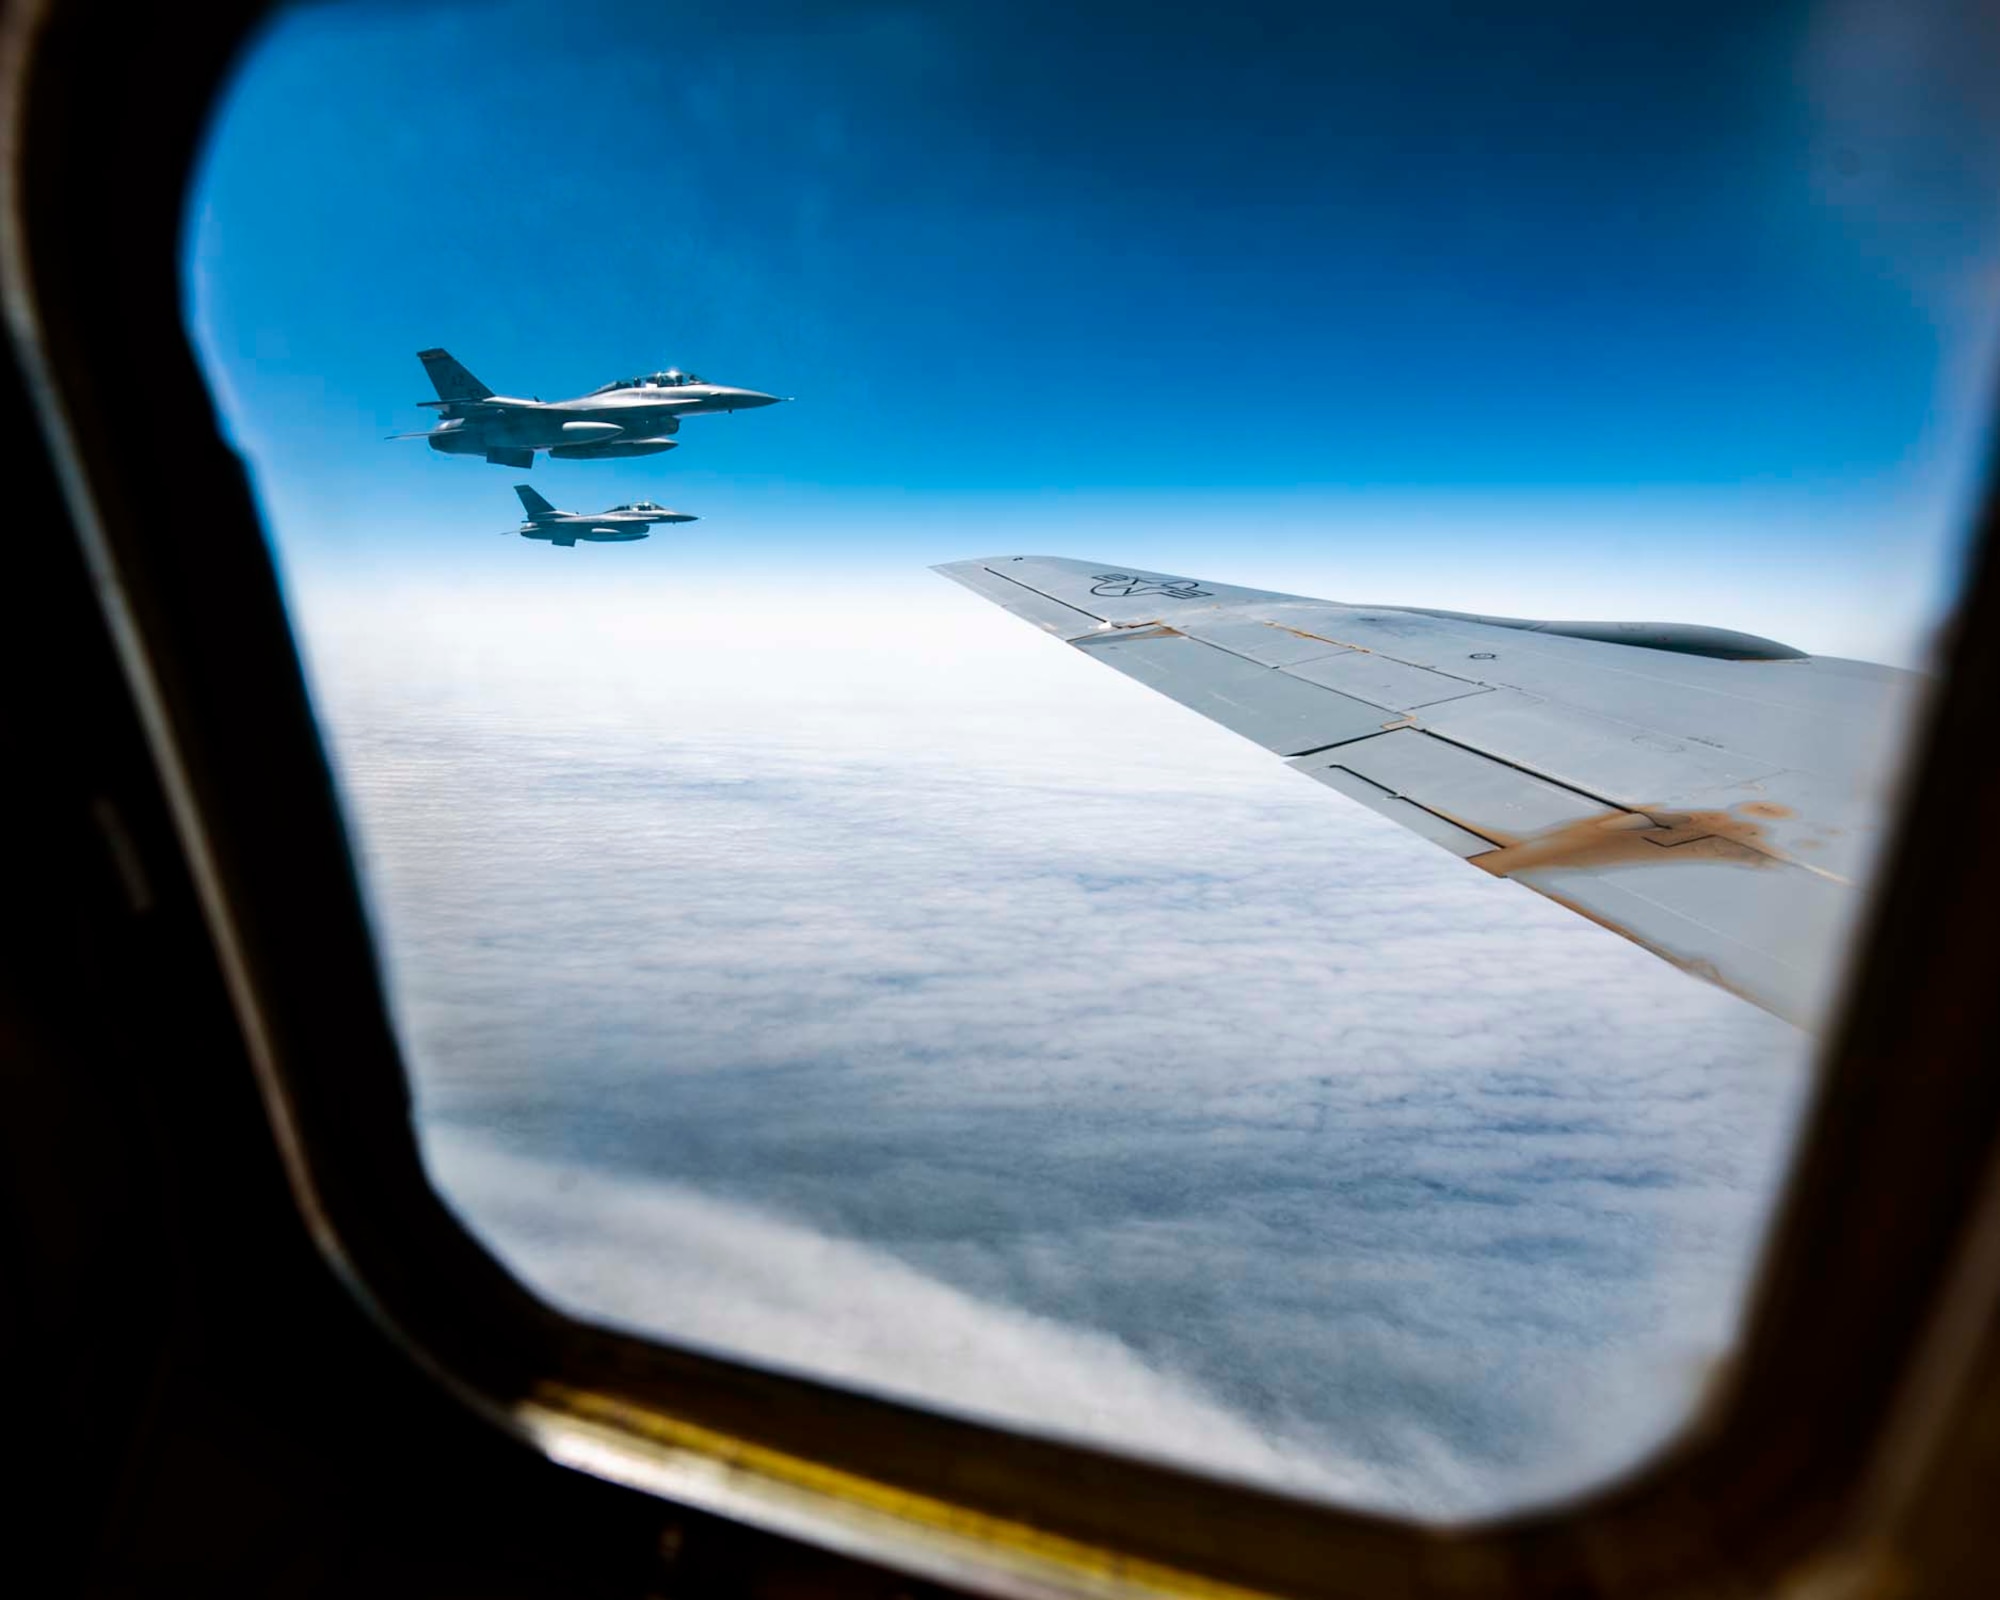 Two F-16D Fighting Flacons from the 162nd Fighter Wing in Tucson, Ariz. can be seen practicing air-intercept procedures from the window of a KC-135 Stratotanker from the 141st Air Refueling Wing over western Oregon during the Aerospace Control Alert CrossTell training exercise July 24, 2018. CrossTell is a three-day exercise involving multiple Air National Guard units, the Civil Air Patrol, and U.S. Coast Guard rotary-wing air intercept units to conduct training scenarios to replicate airborne intercepts designed to safely escort violators out of restricted airspace. (U.S. Air National Guard photo by Staff Sgt. Rose M. Lust)